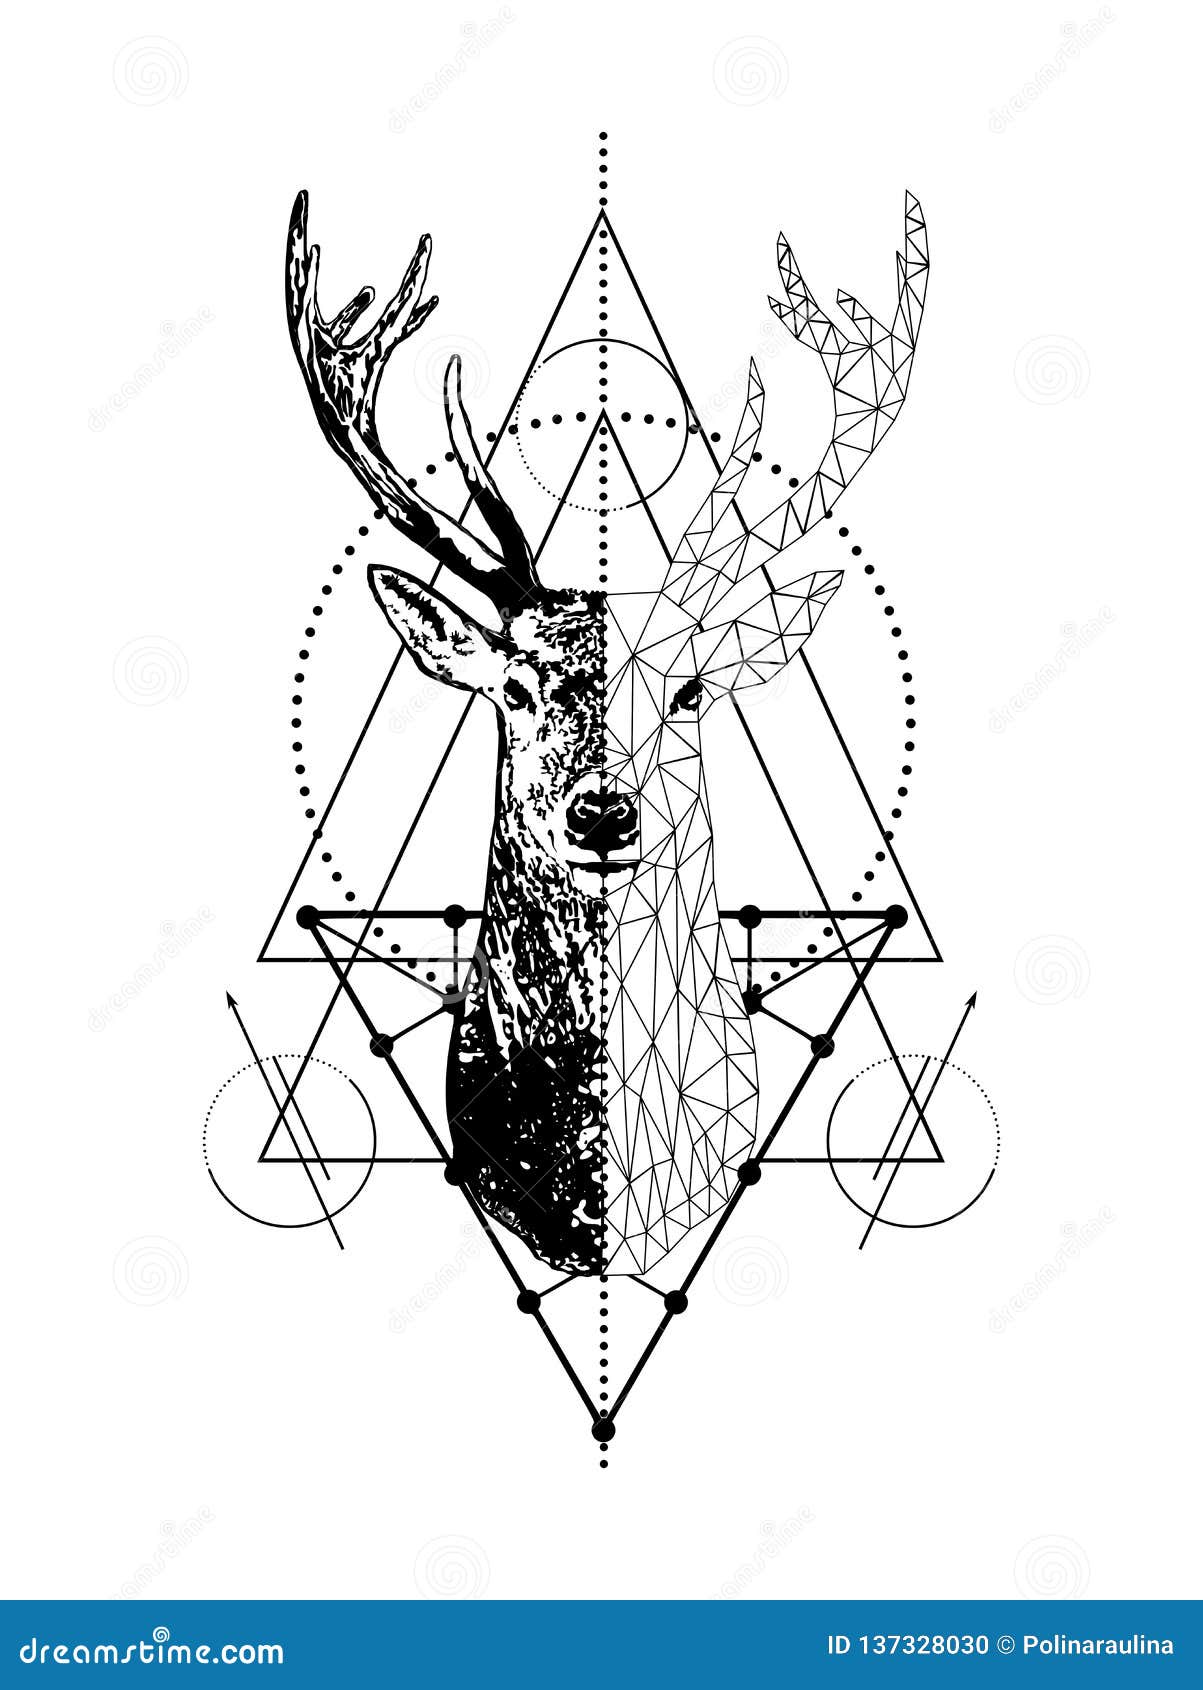 Vector Creative Geometric Deer Tattoo Art Style DesignLow Poly Deer Head  with Triangle Stock Photo  Illustration of antlers christmas 137328030